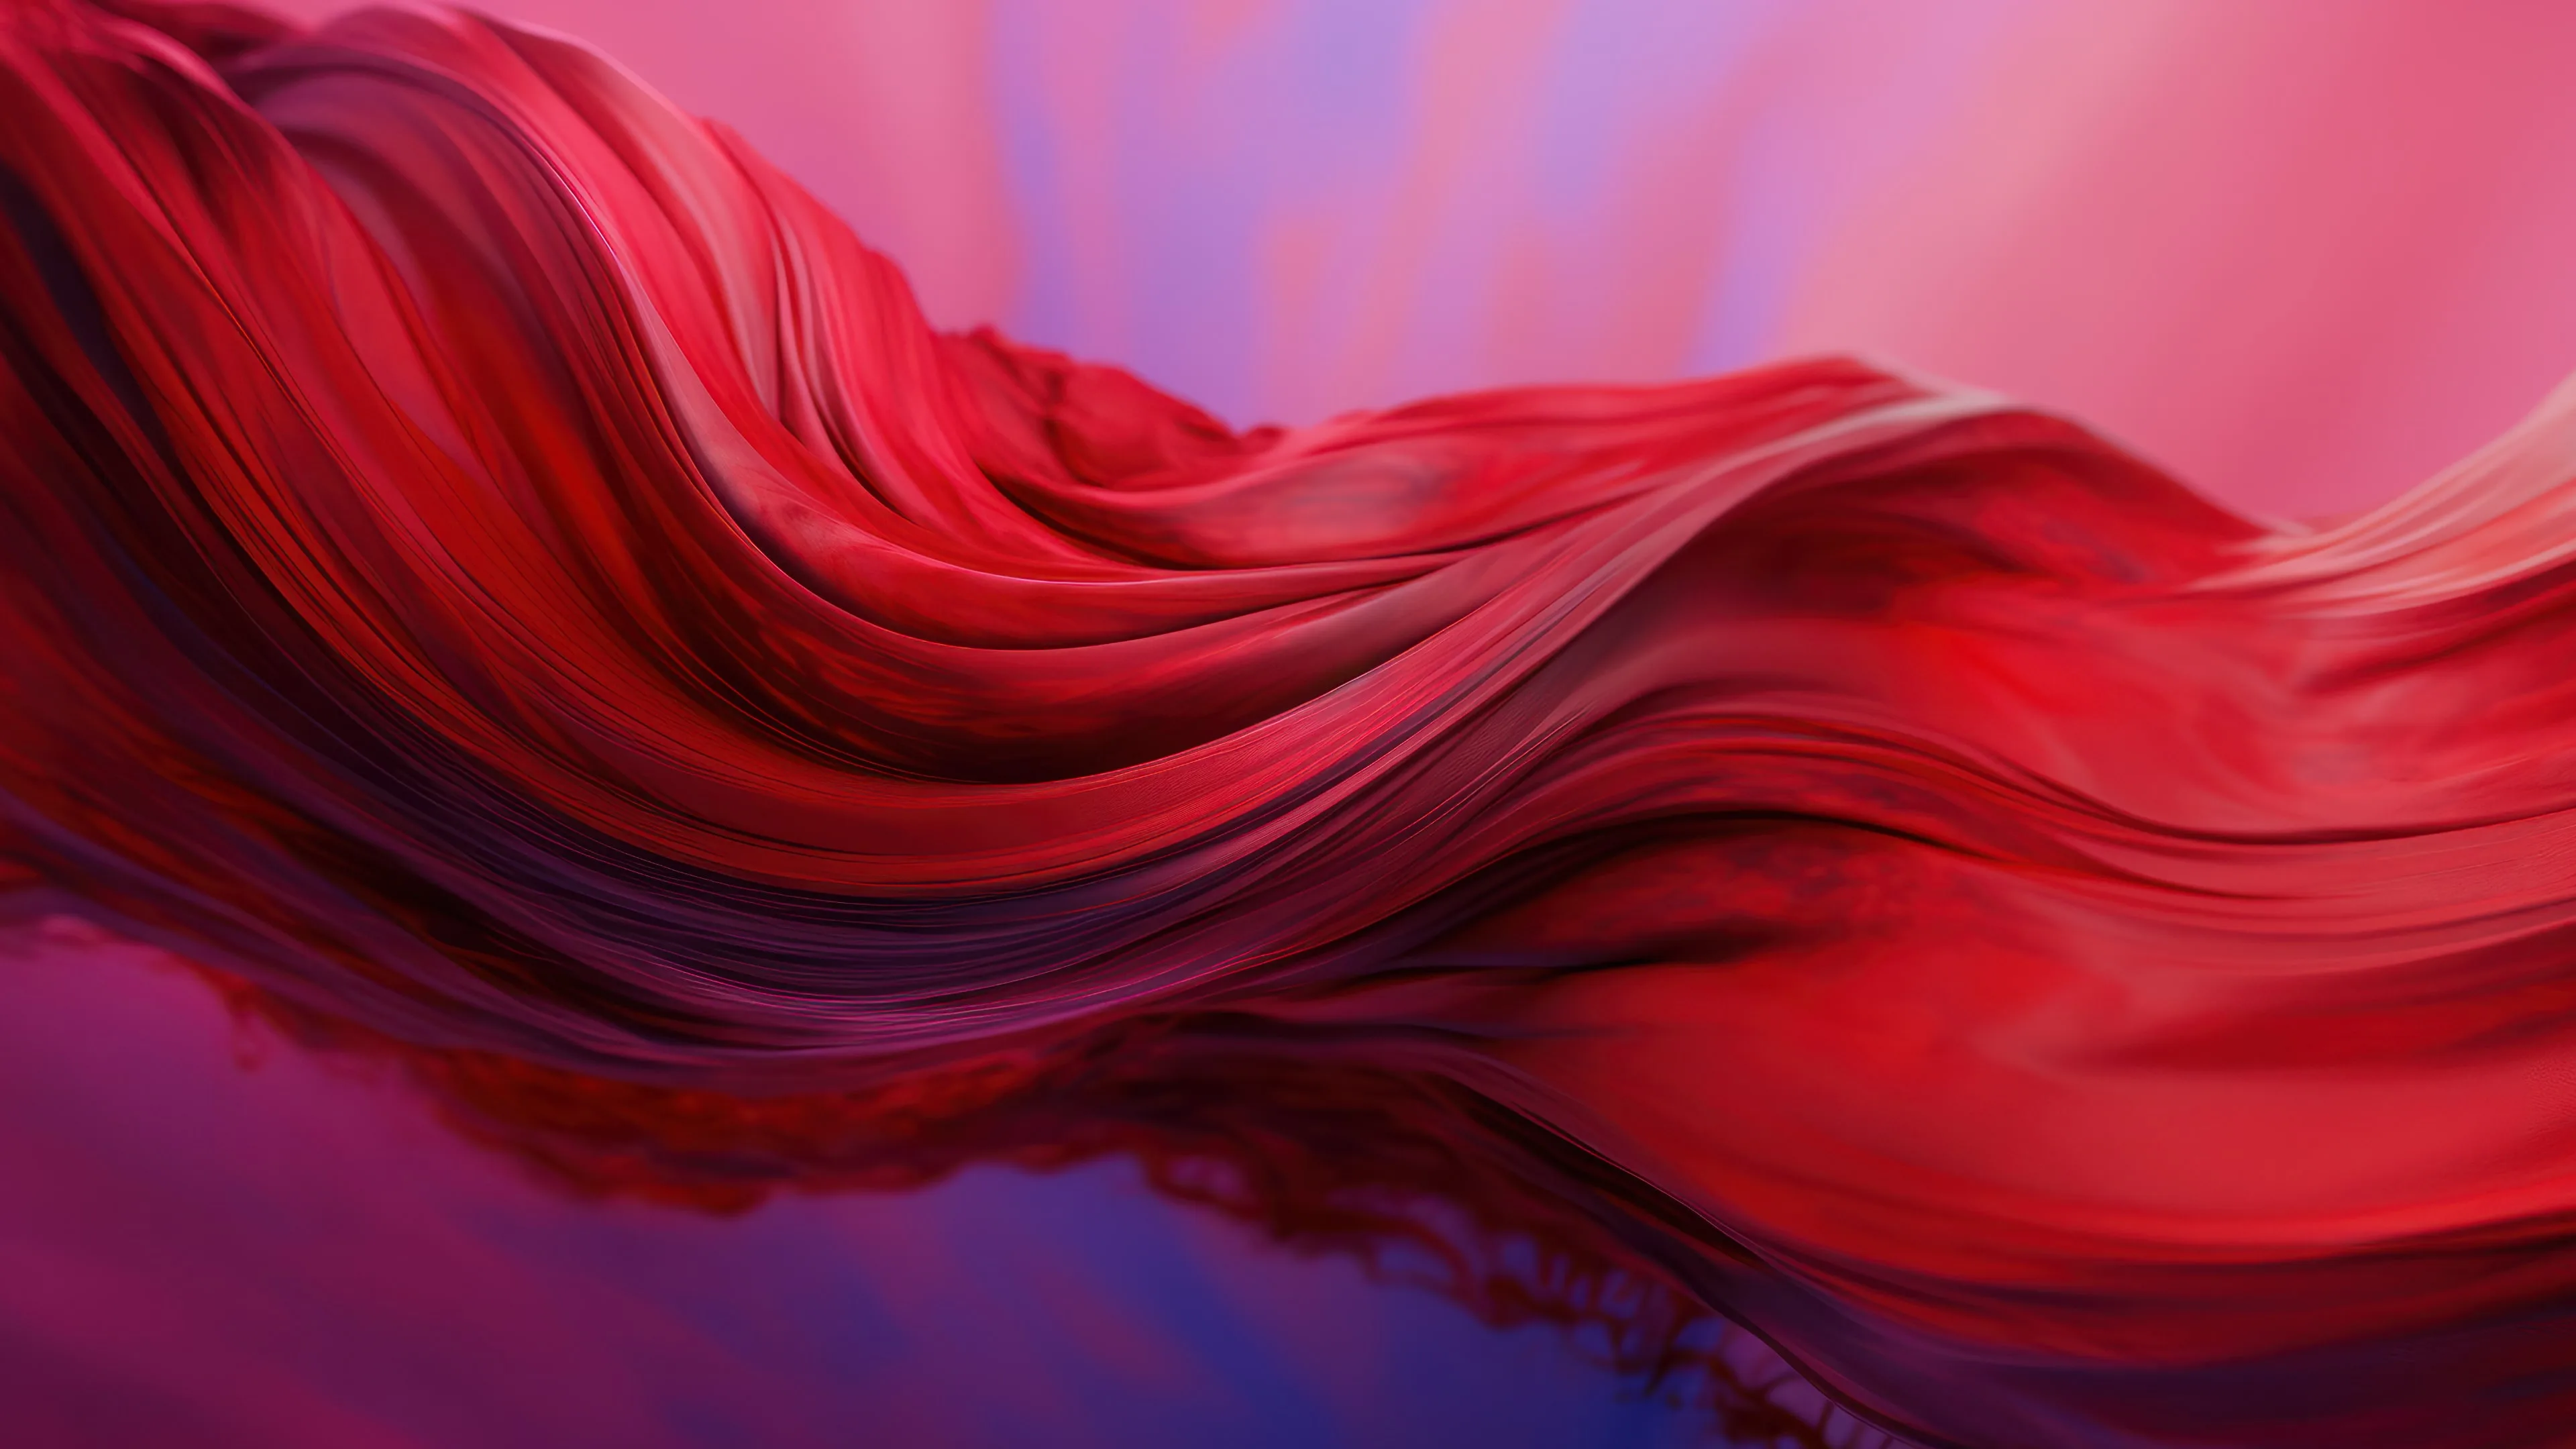 A red and blue abstract image with flowing fabric. - Windows 10